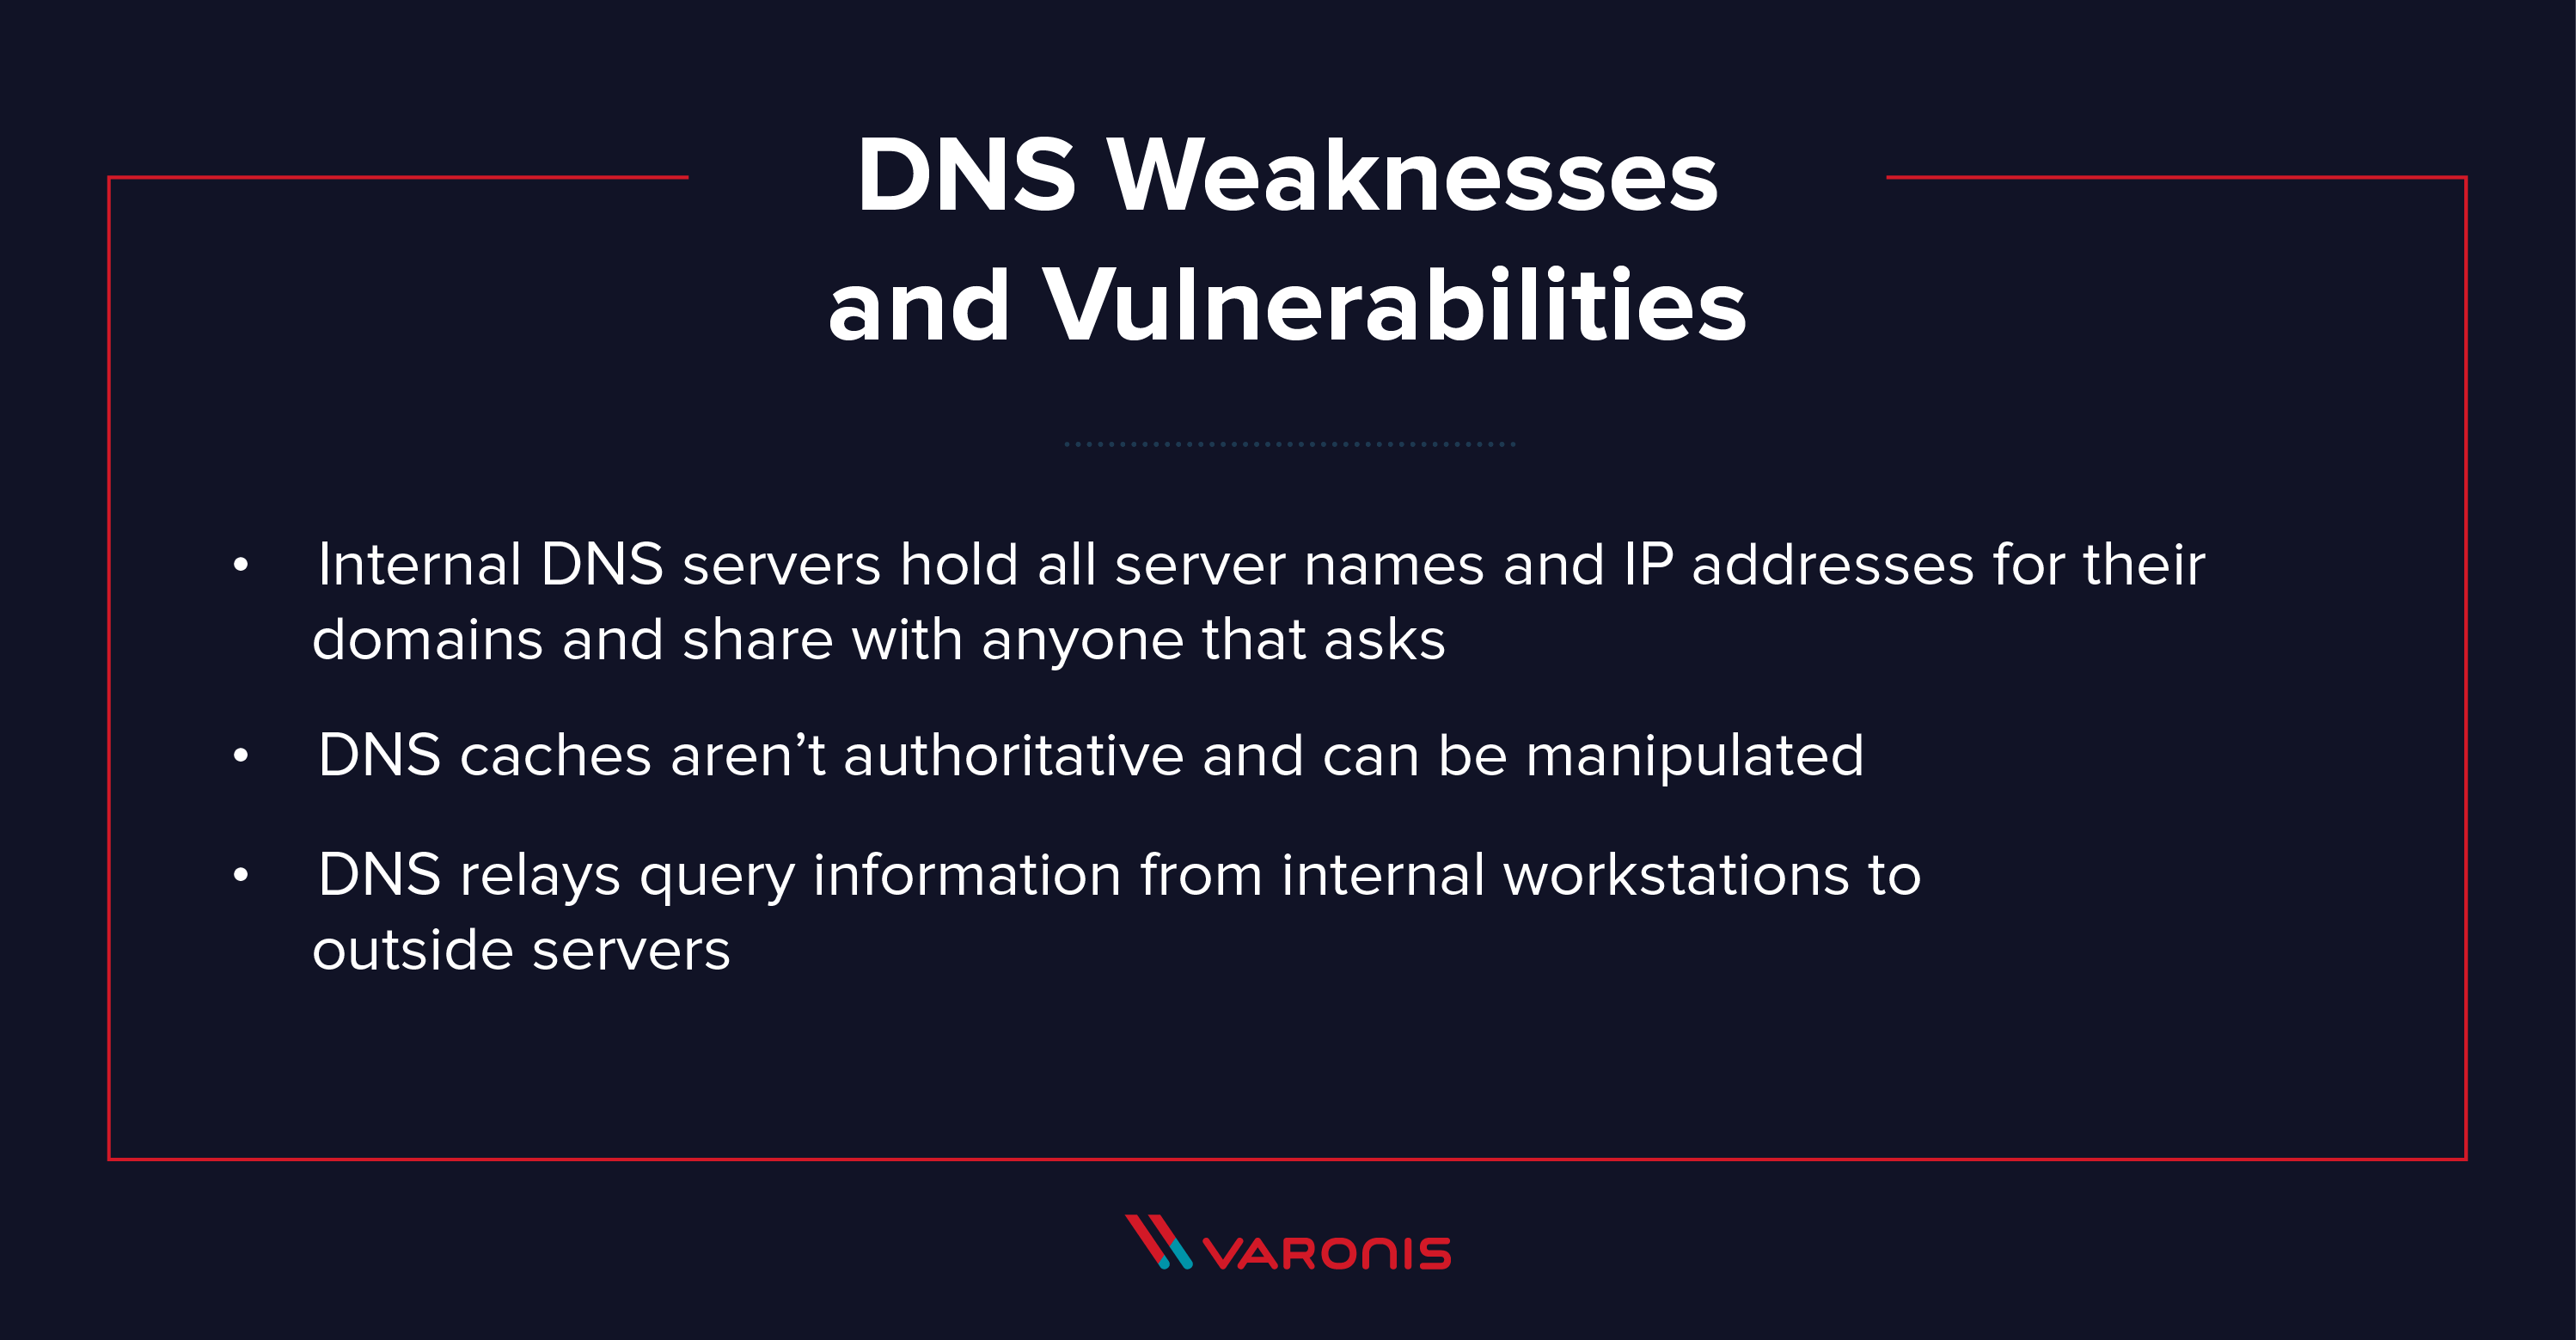 DNS weaknesses and vulnerabilites